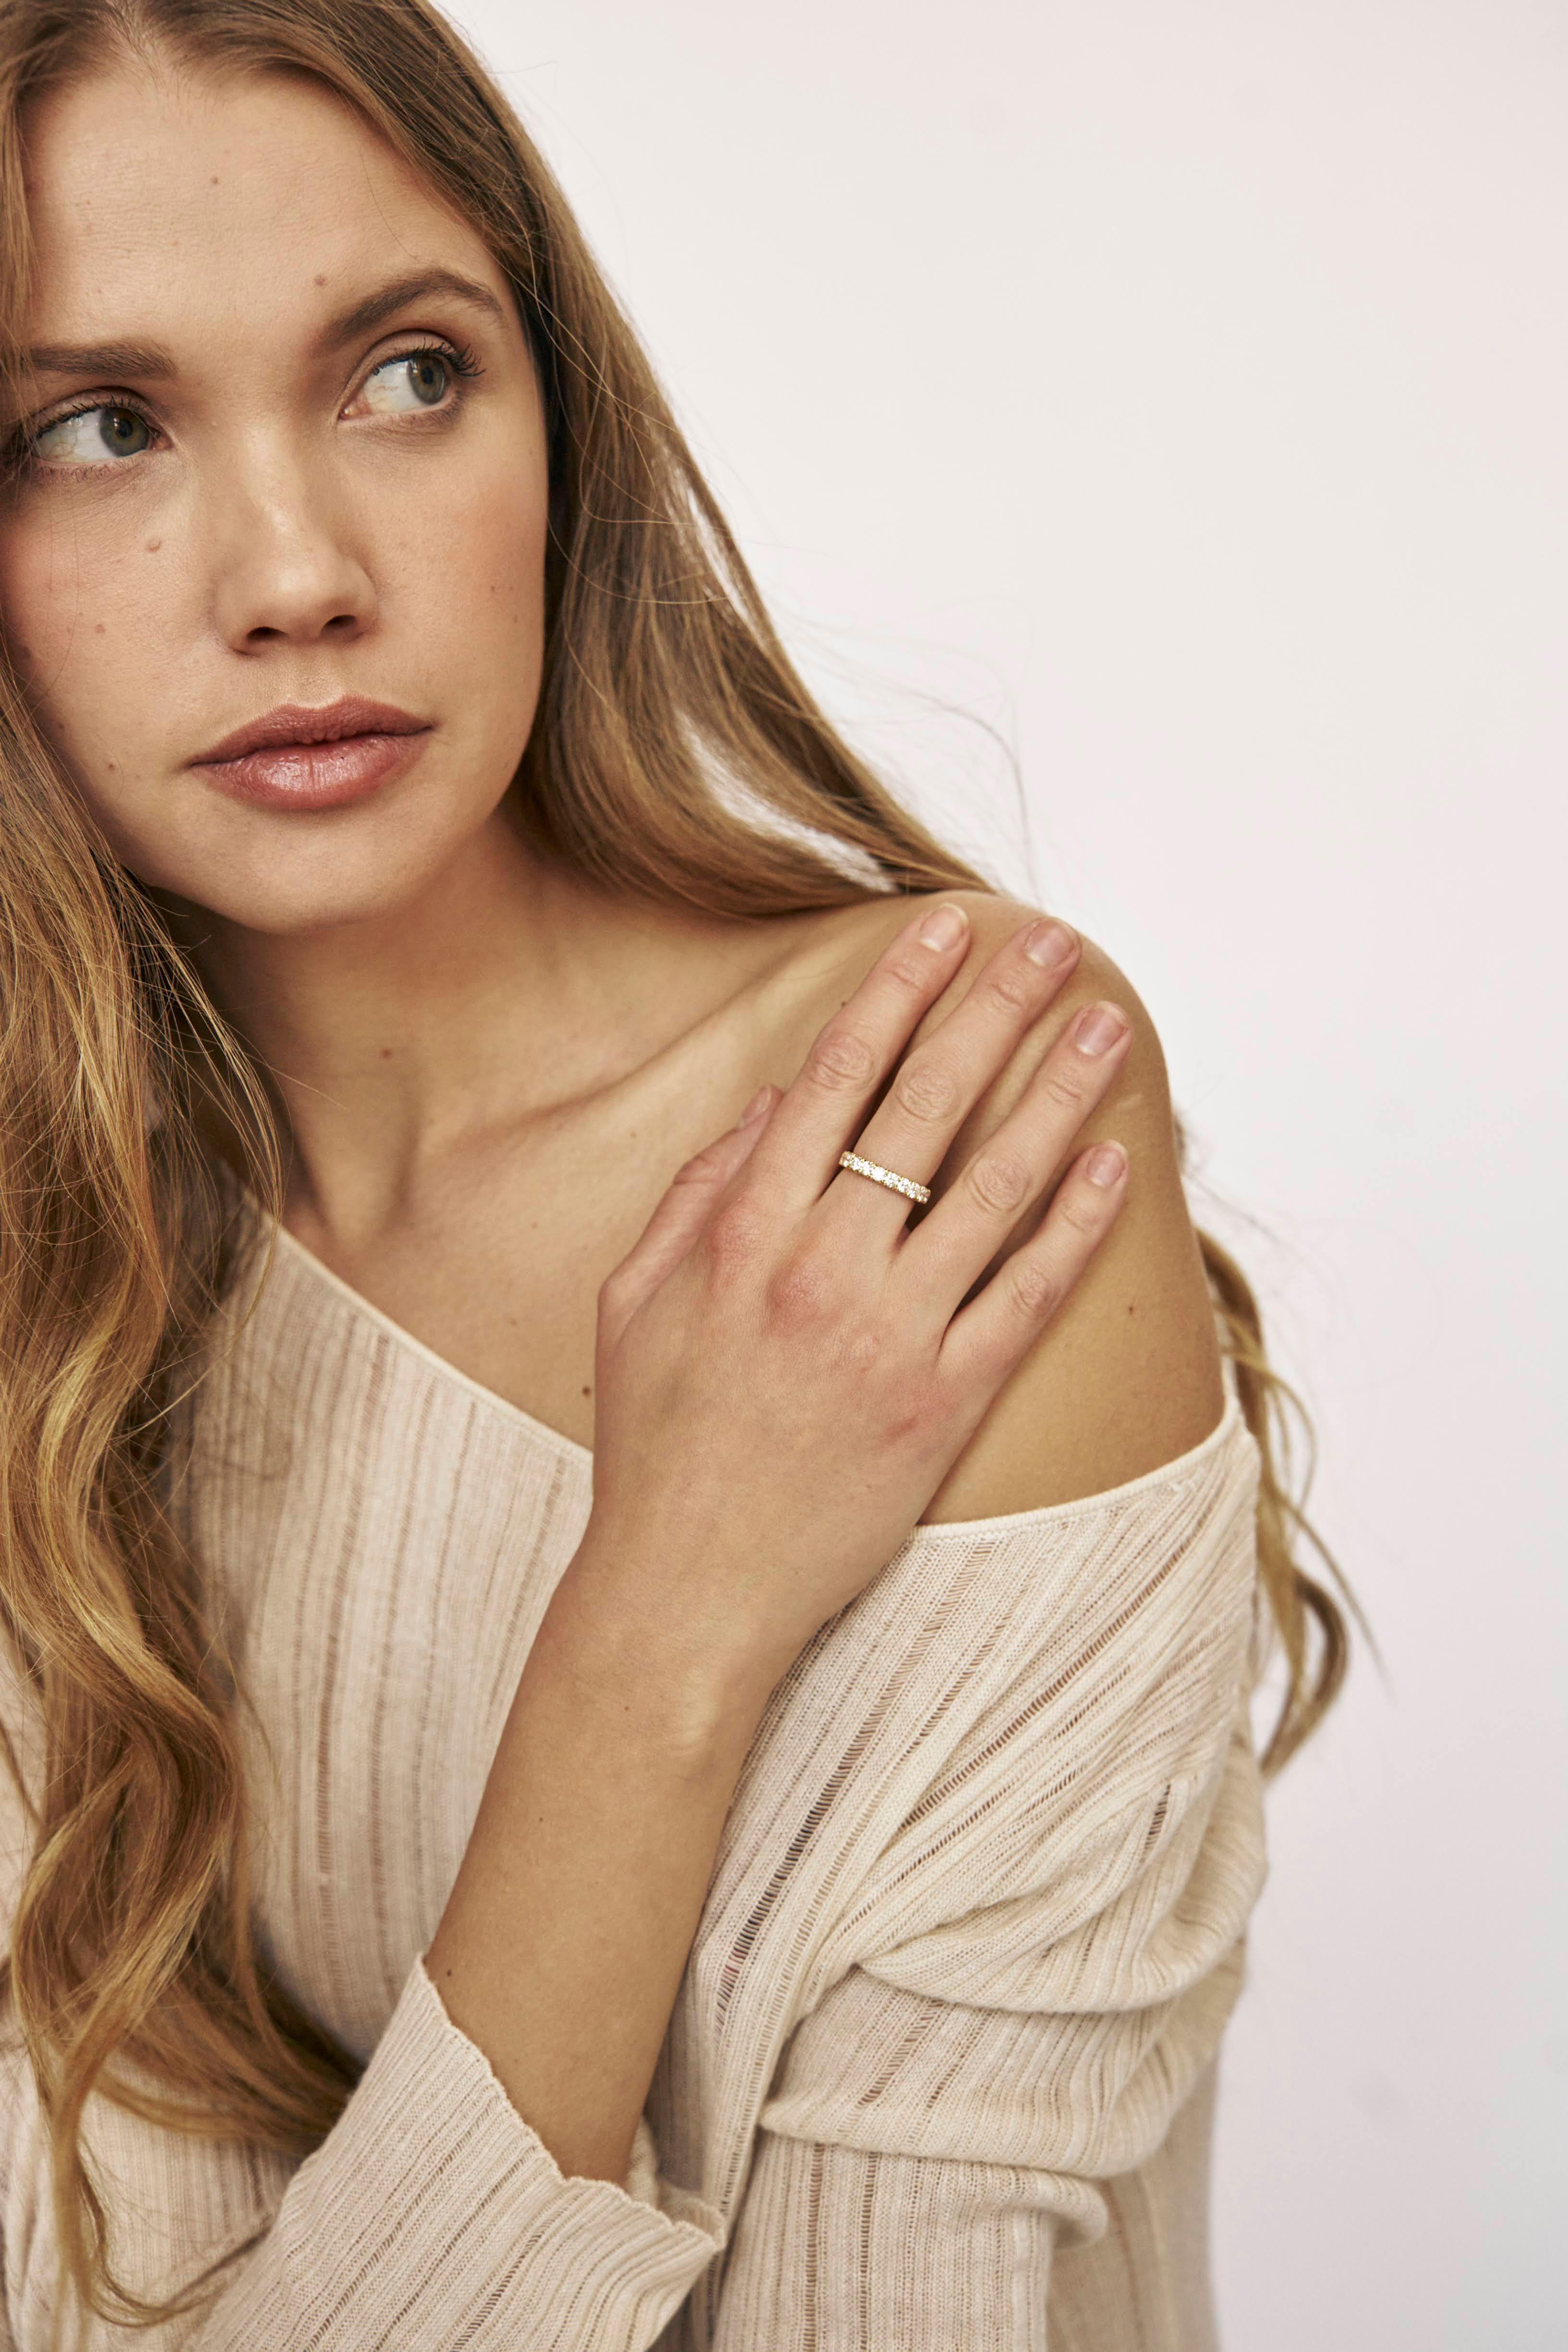 Our most classic and essential ring. Stack them together, with other rings or simply wear them alone. You can’t go wrong with the Half Band ring, in fact, you’ll love it!

18kt Yellow Gold
Dimensions: 3.5mm thick
Size: 6.5
Total Carat Weight: